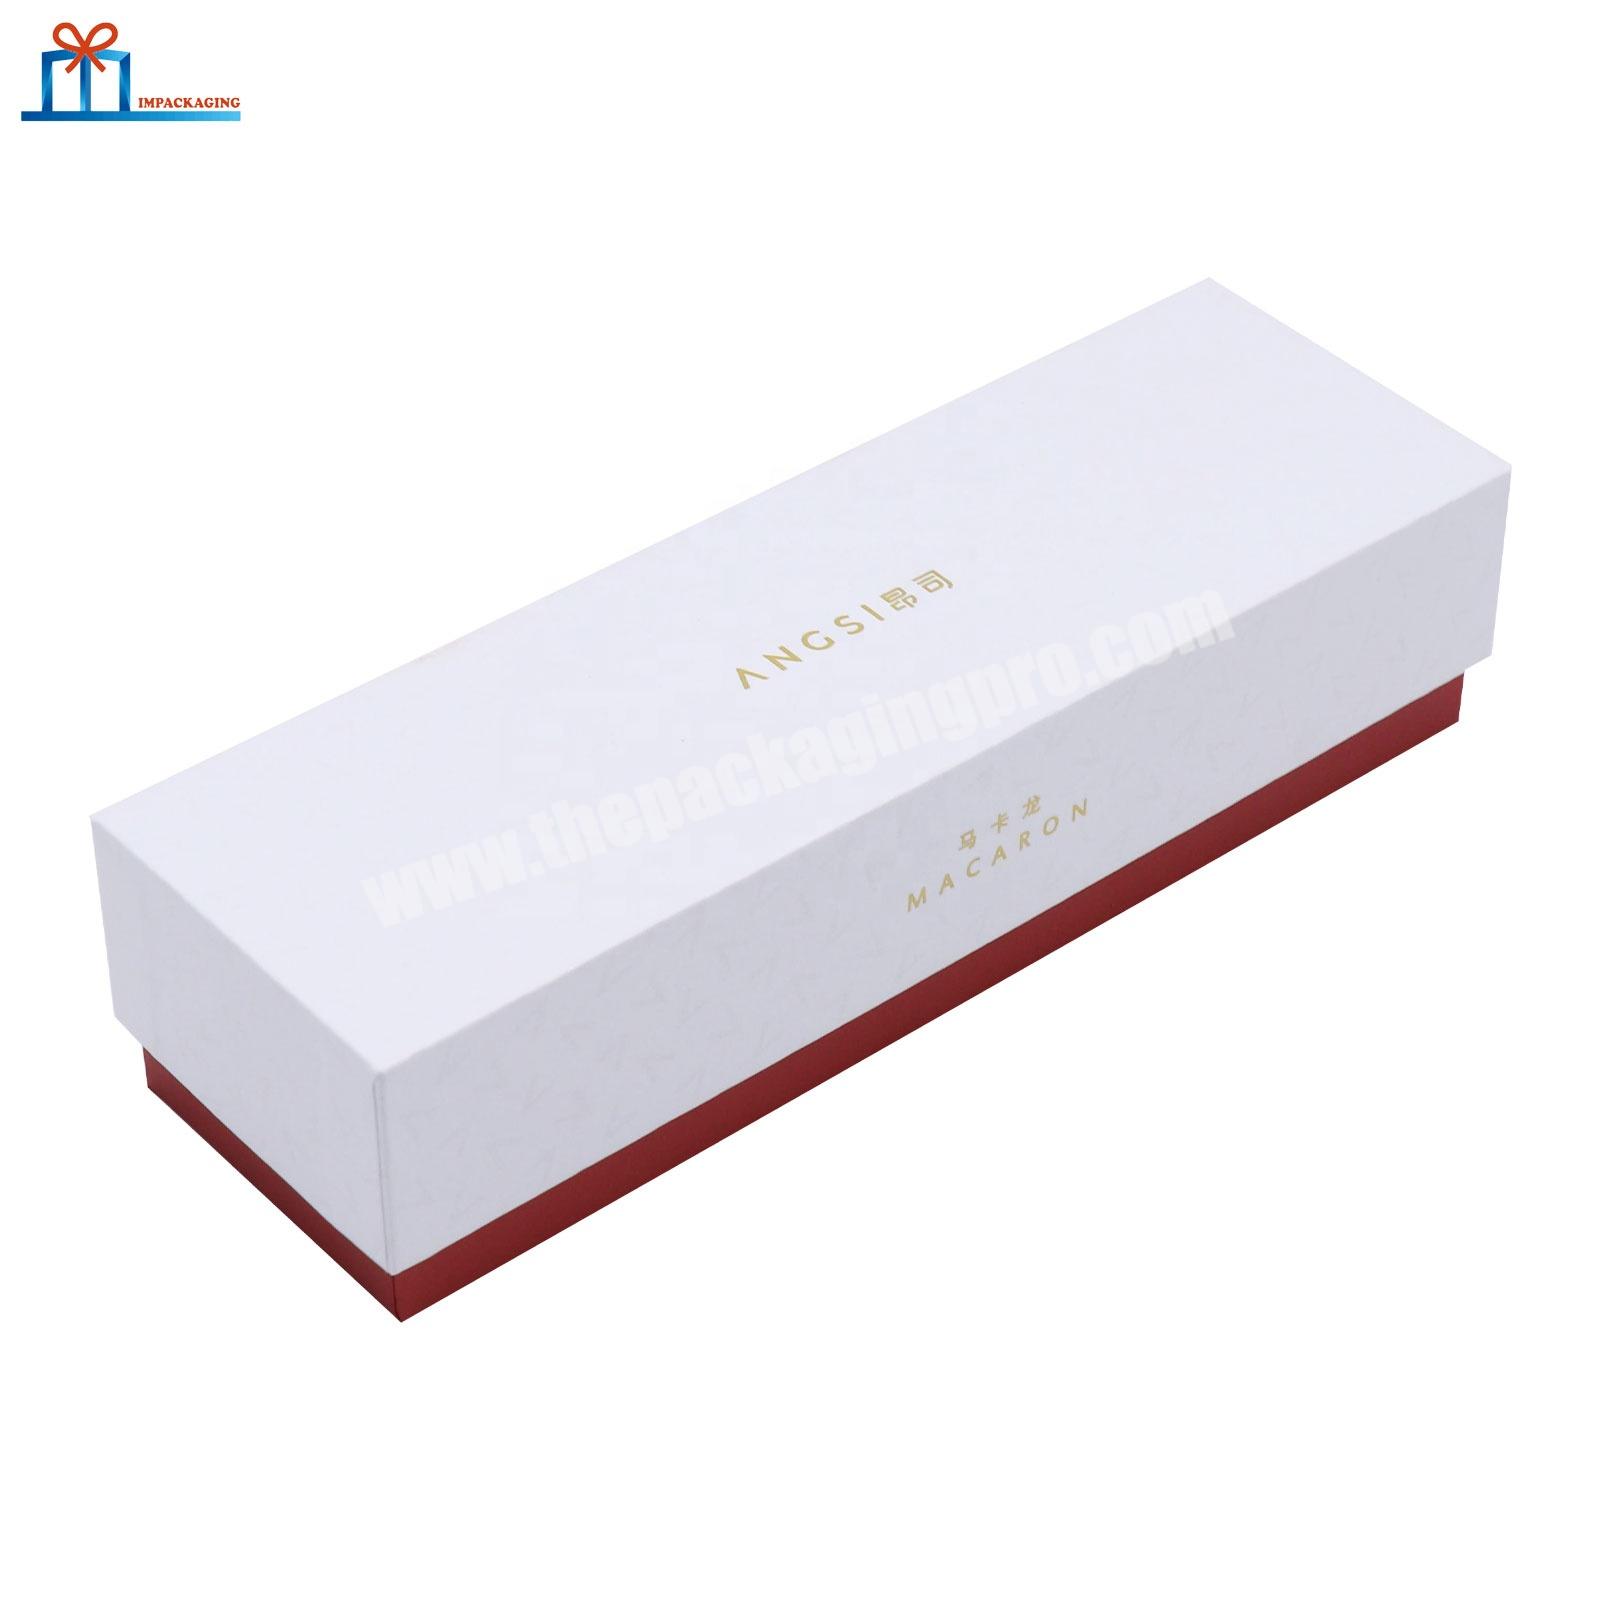 Custom pastry cookies macaron gift box wholesale 2 pieces macaron box packaging rectangle cardboard paper box